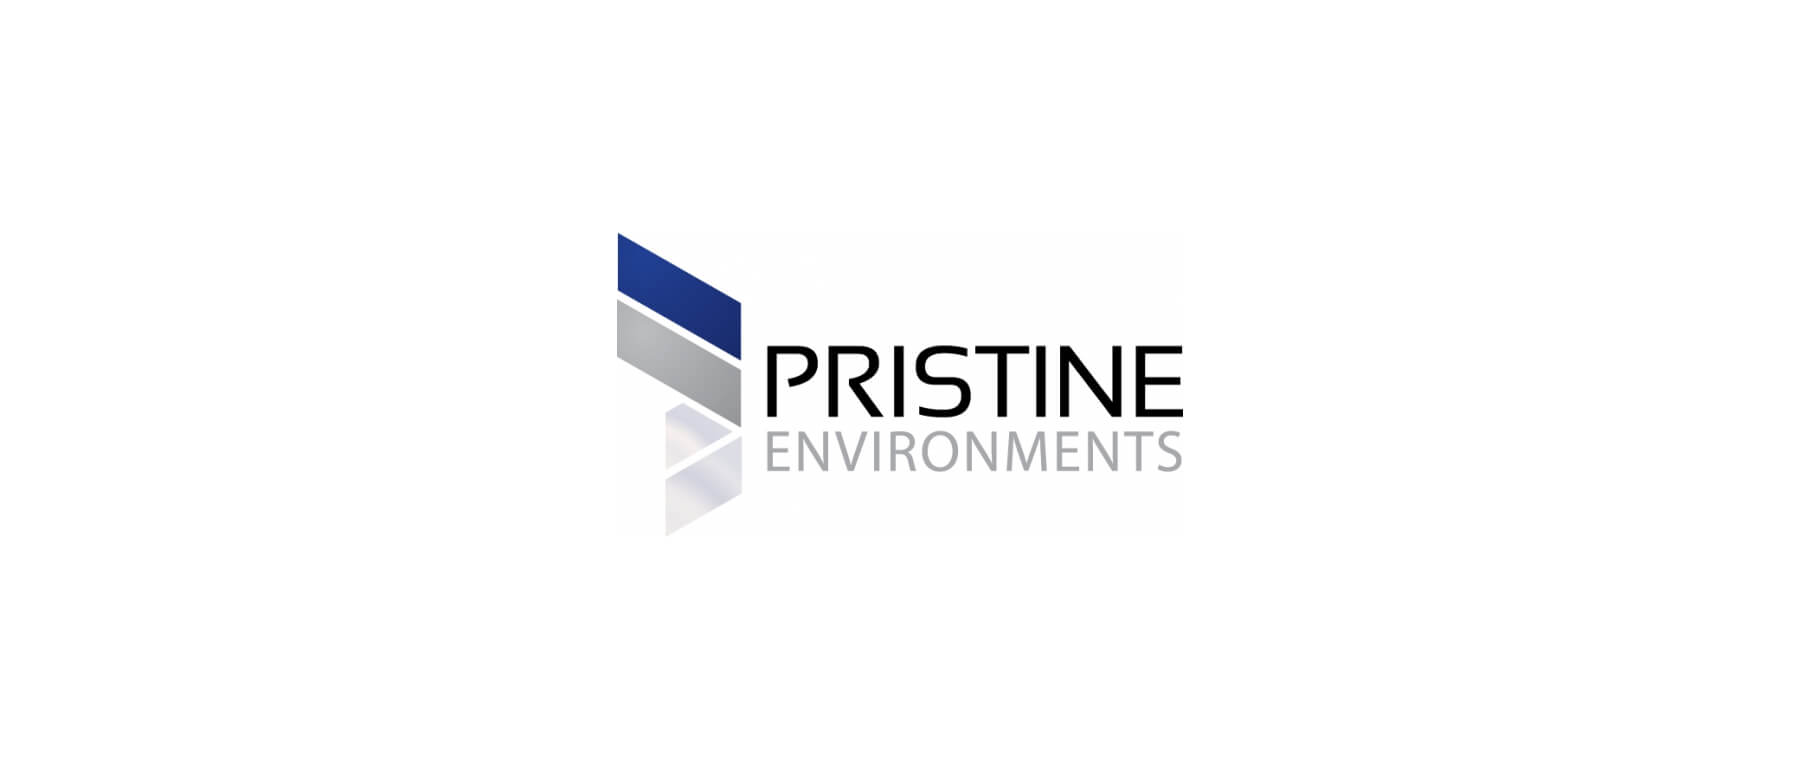 Backbone Capital Secures Financing For Pristine Environments, Inc.